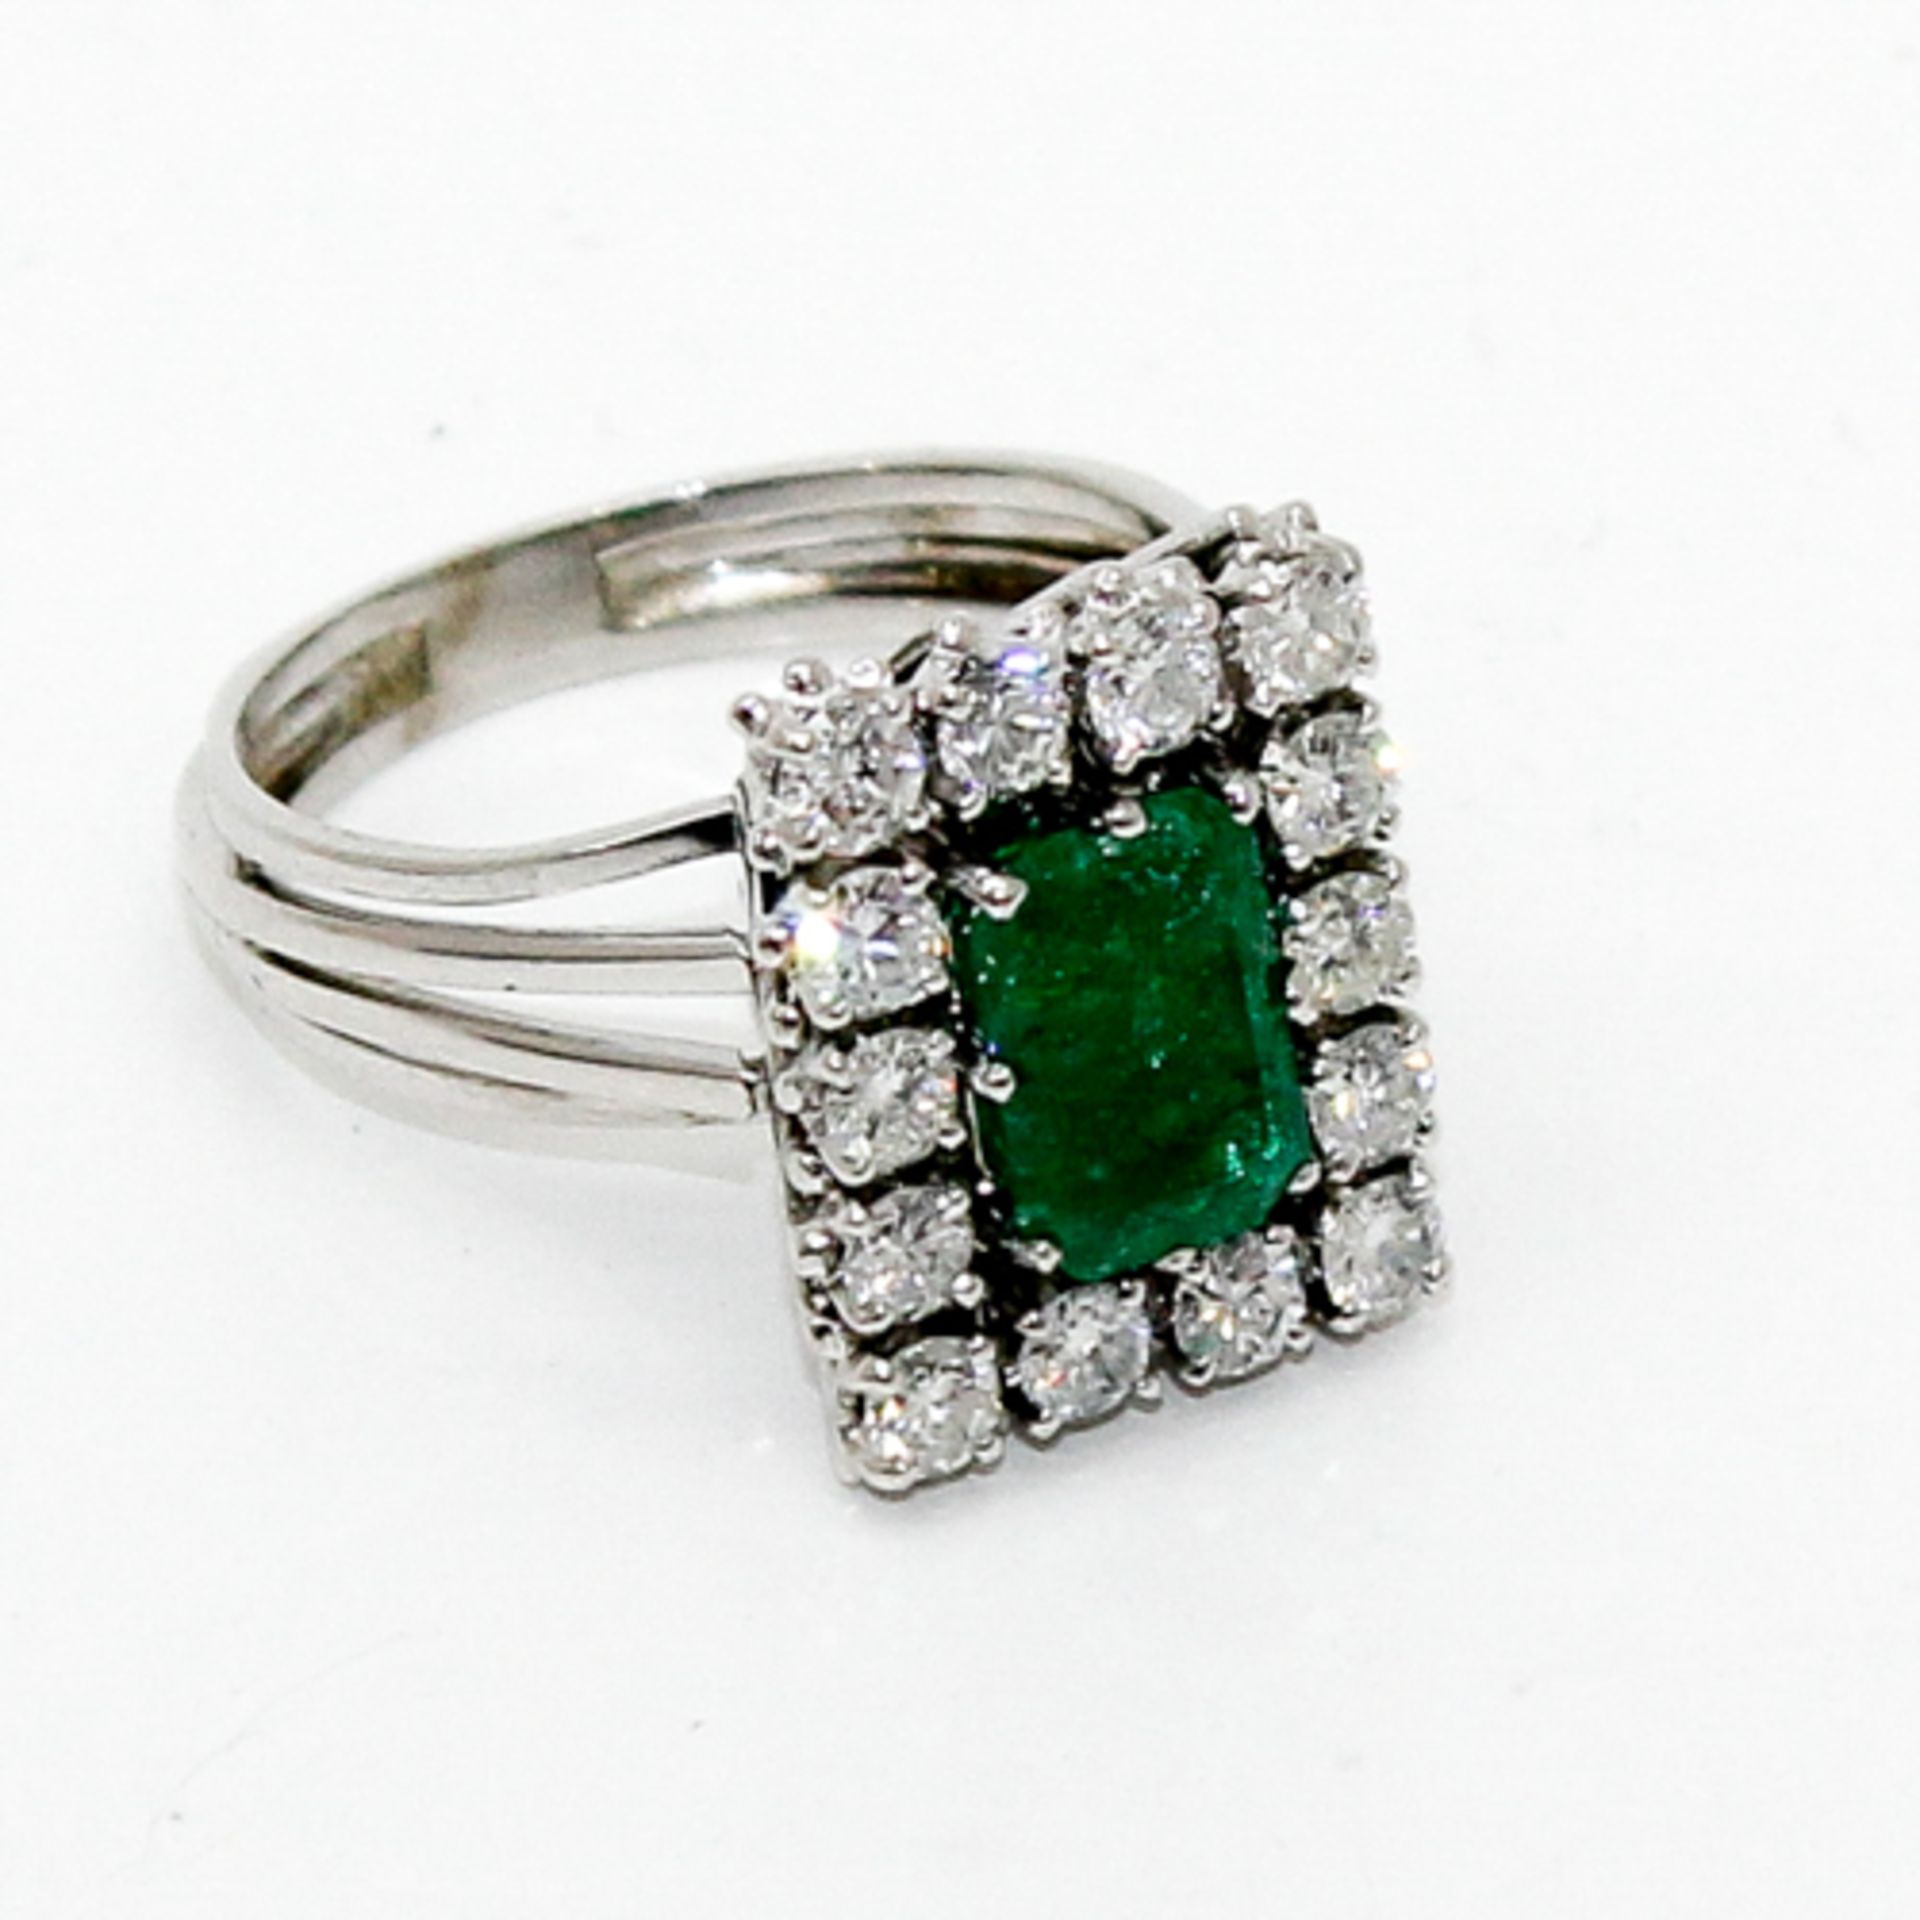 18KWG LADIES EMERALD AND DIAMOND RING Emerald is approximately 3 ct. with surrounding diamond